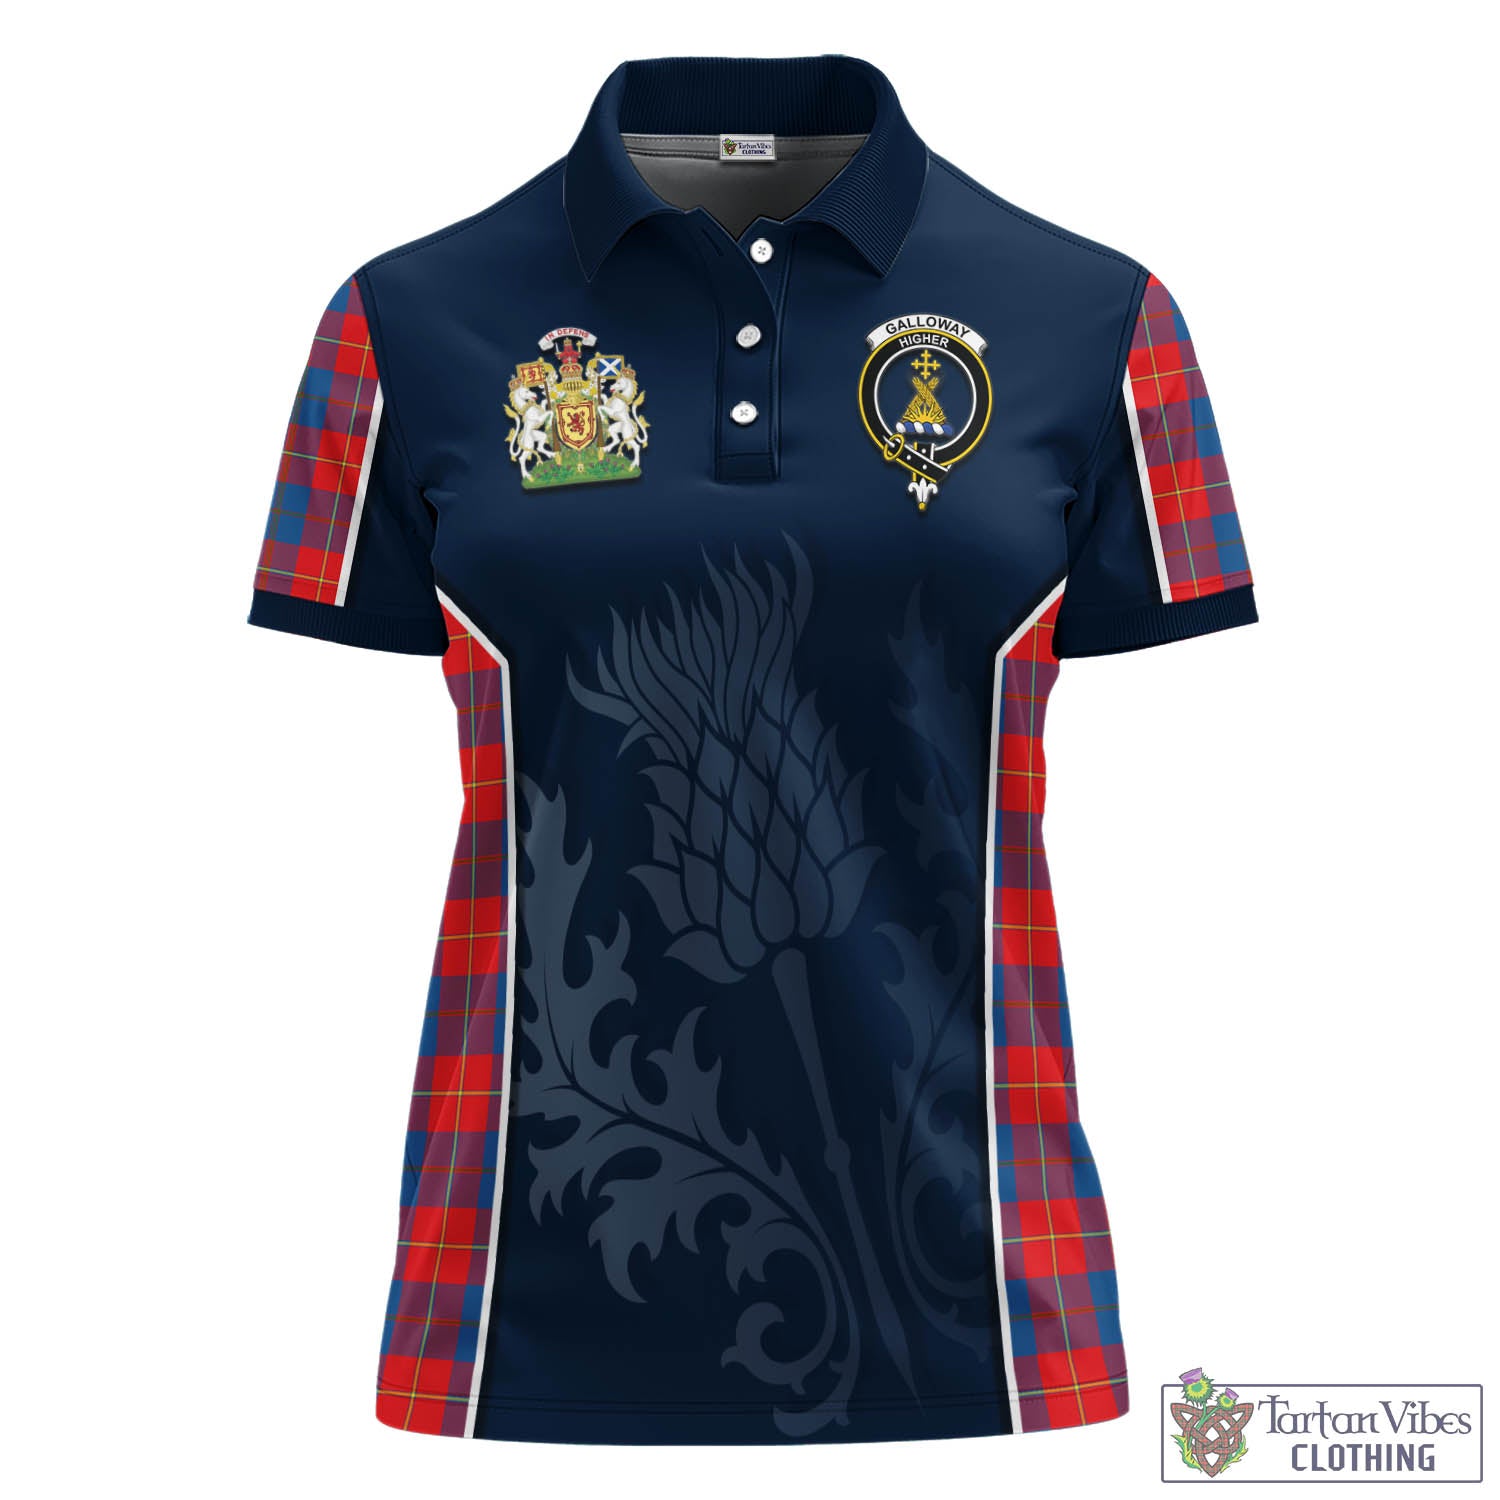 Tartan Vibes Clothing Galloway Red Tartan Women's Polo Shirt with Family Crest and Scottish Thistle Vibes Sport Style